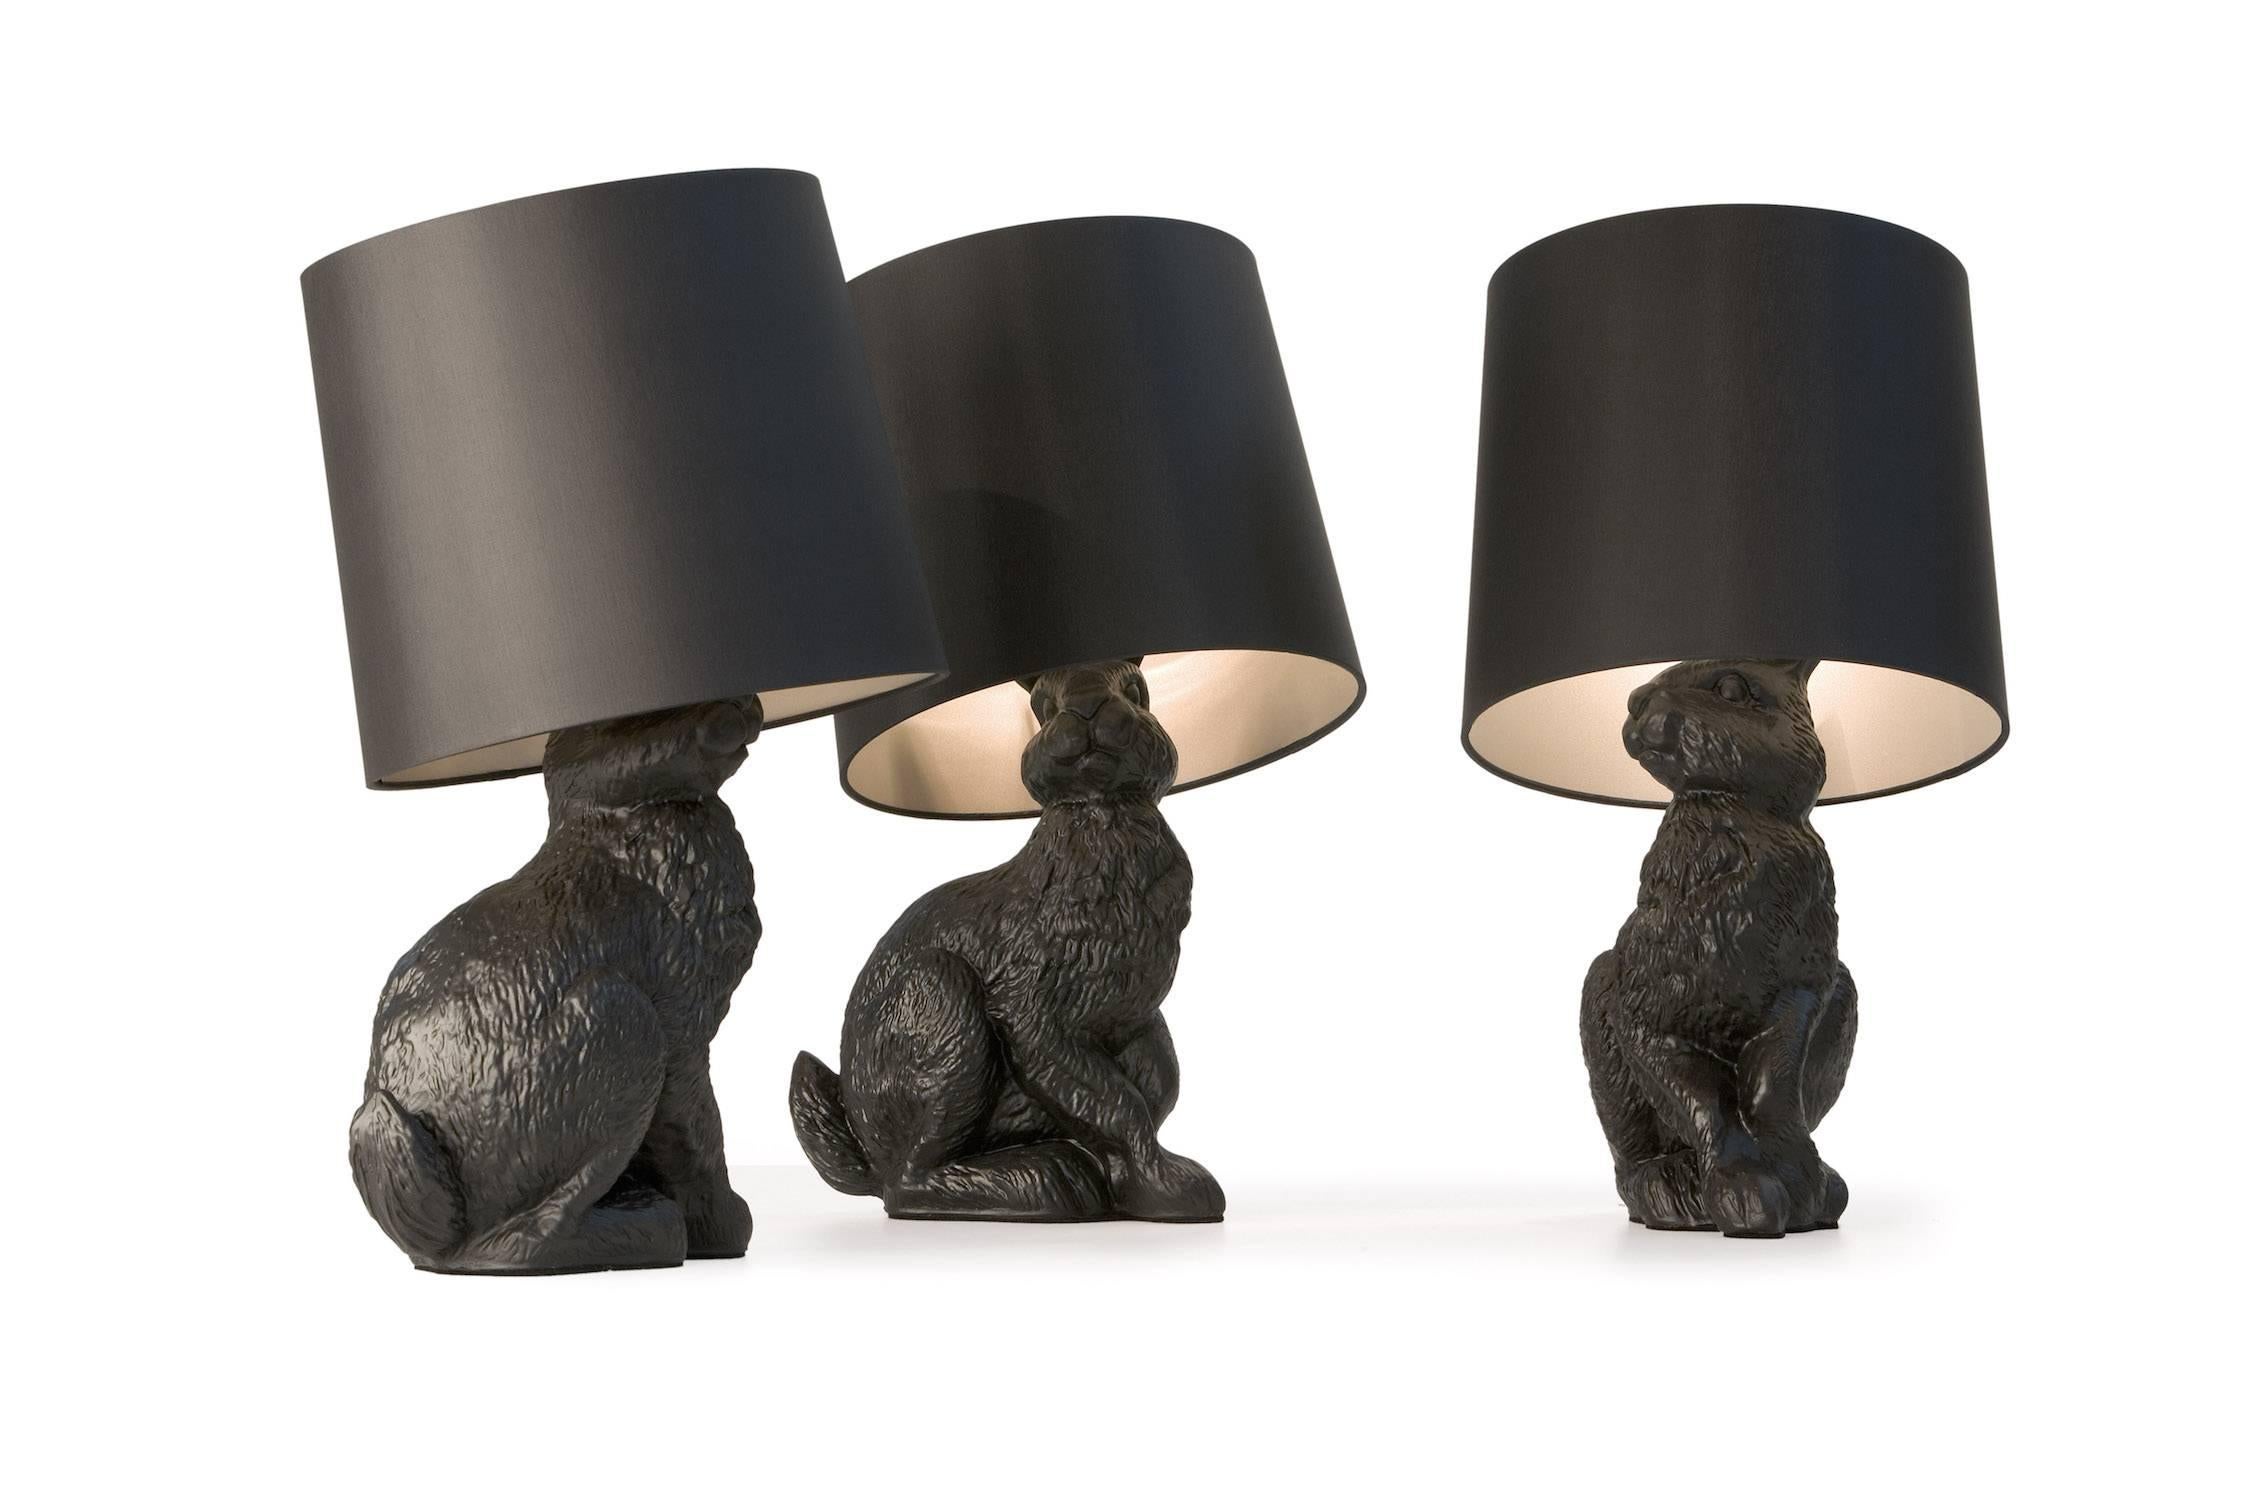 The Rabbit lamp is one of a three-piece collection of animal furniture which also includes a life-sized Horse Lamp and Pig Table. A perfect guest for a Mad Hatters tea party.